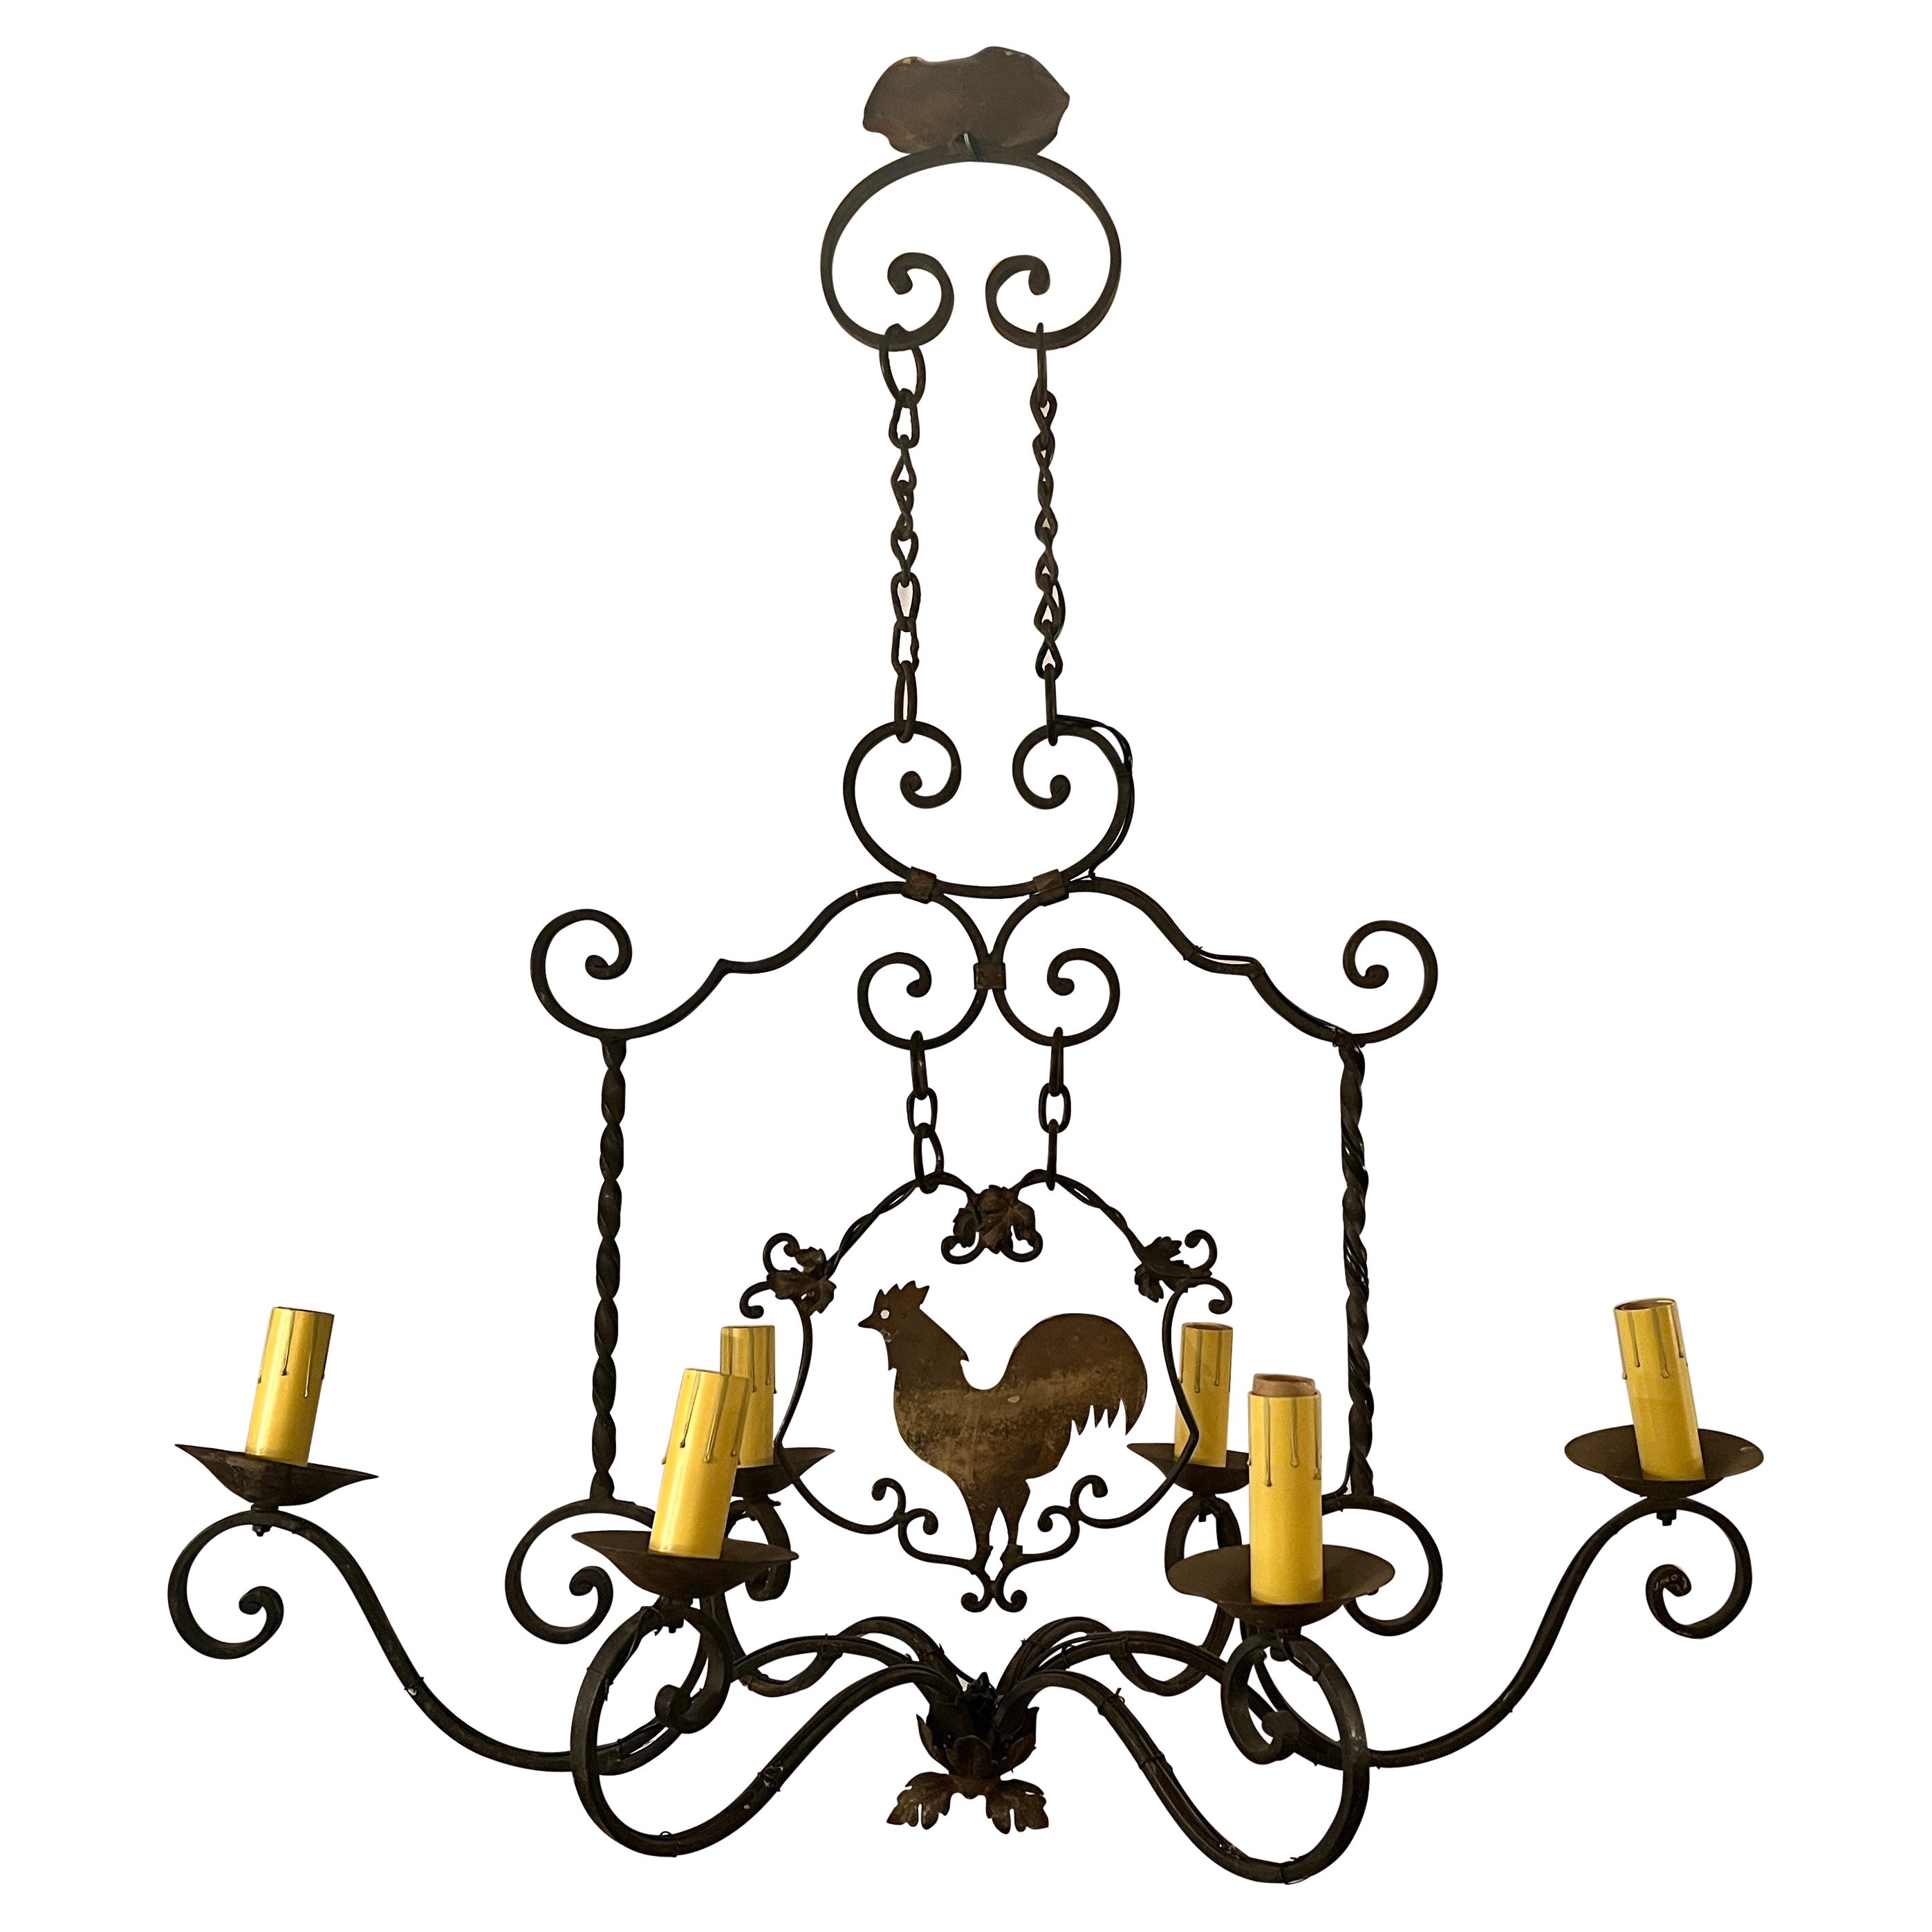 Antique French Wrought Iron "Rooster" Chandelier, Circa 1910-1920. For Sale